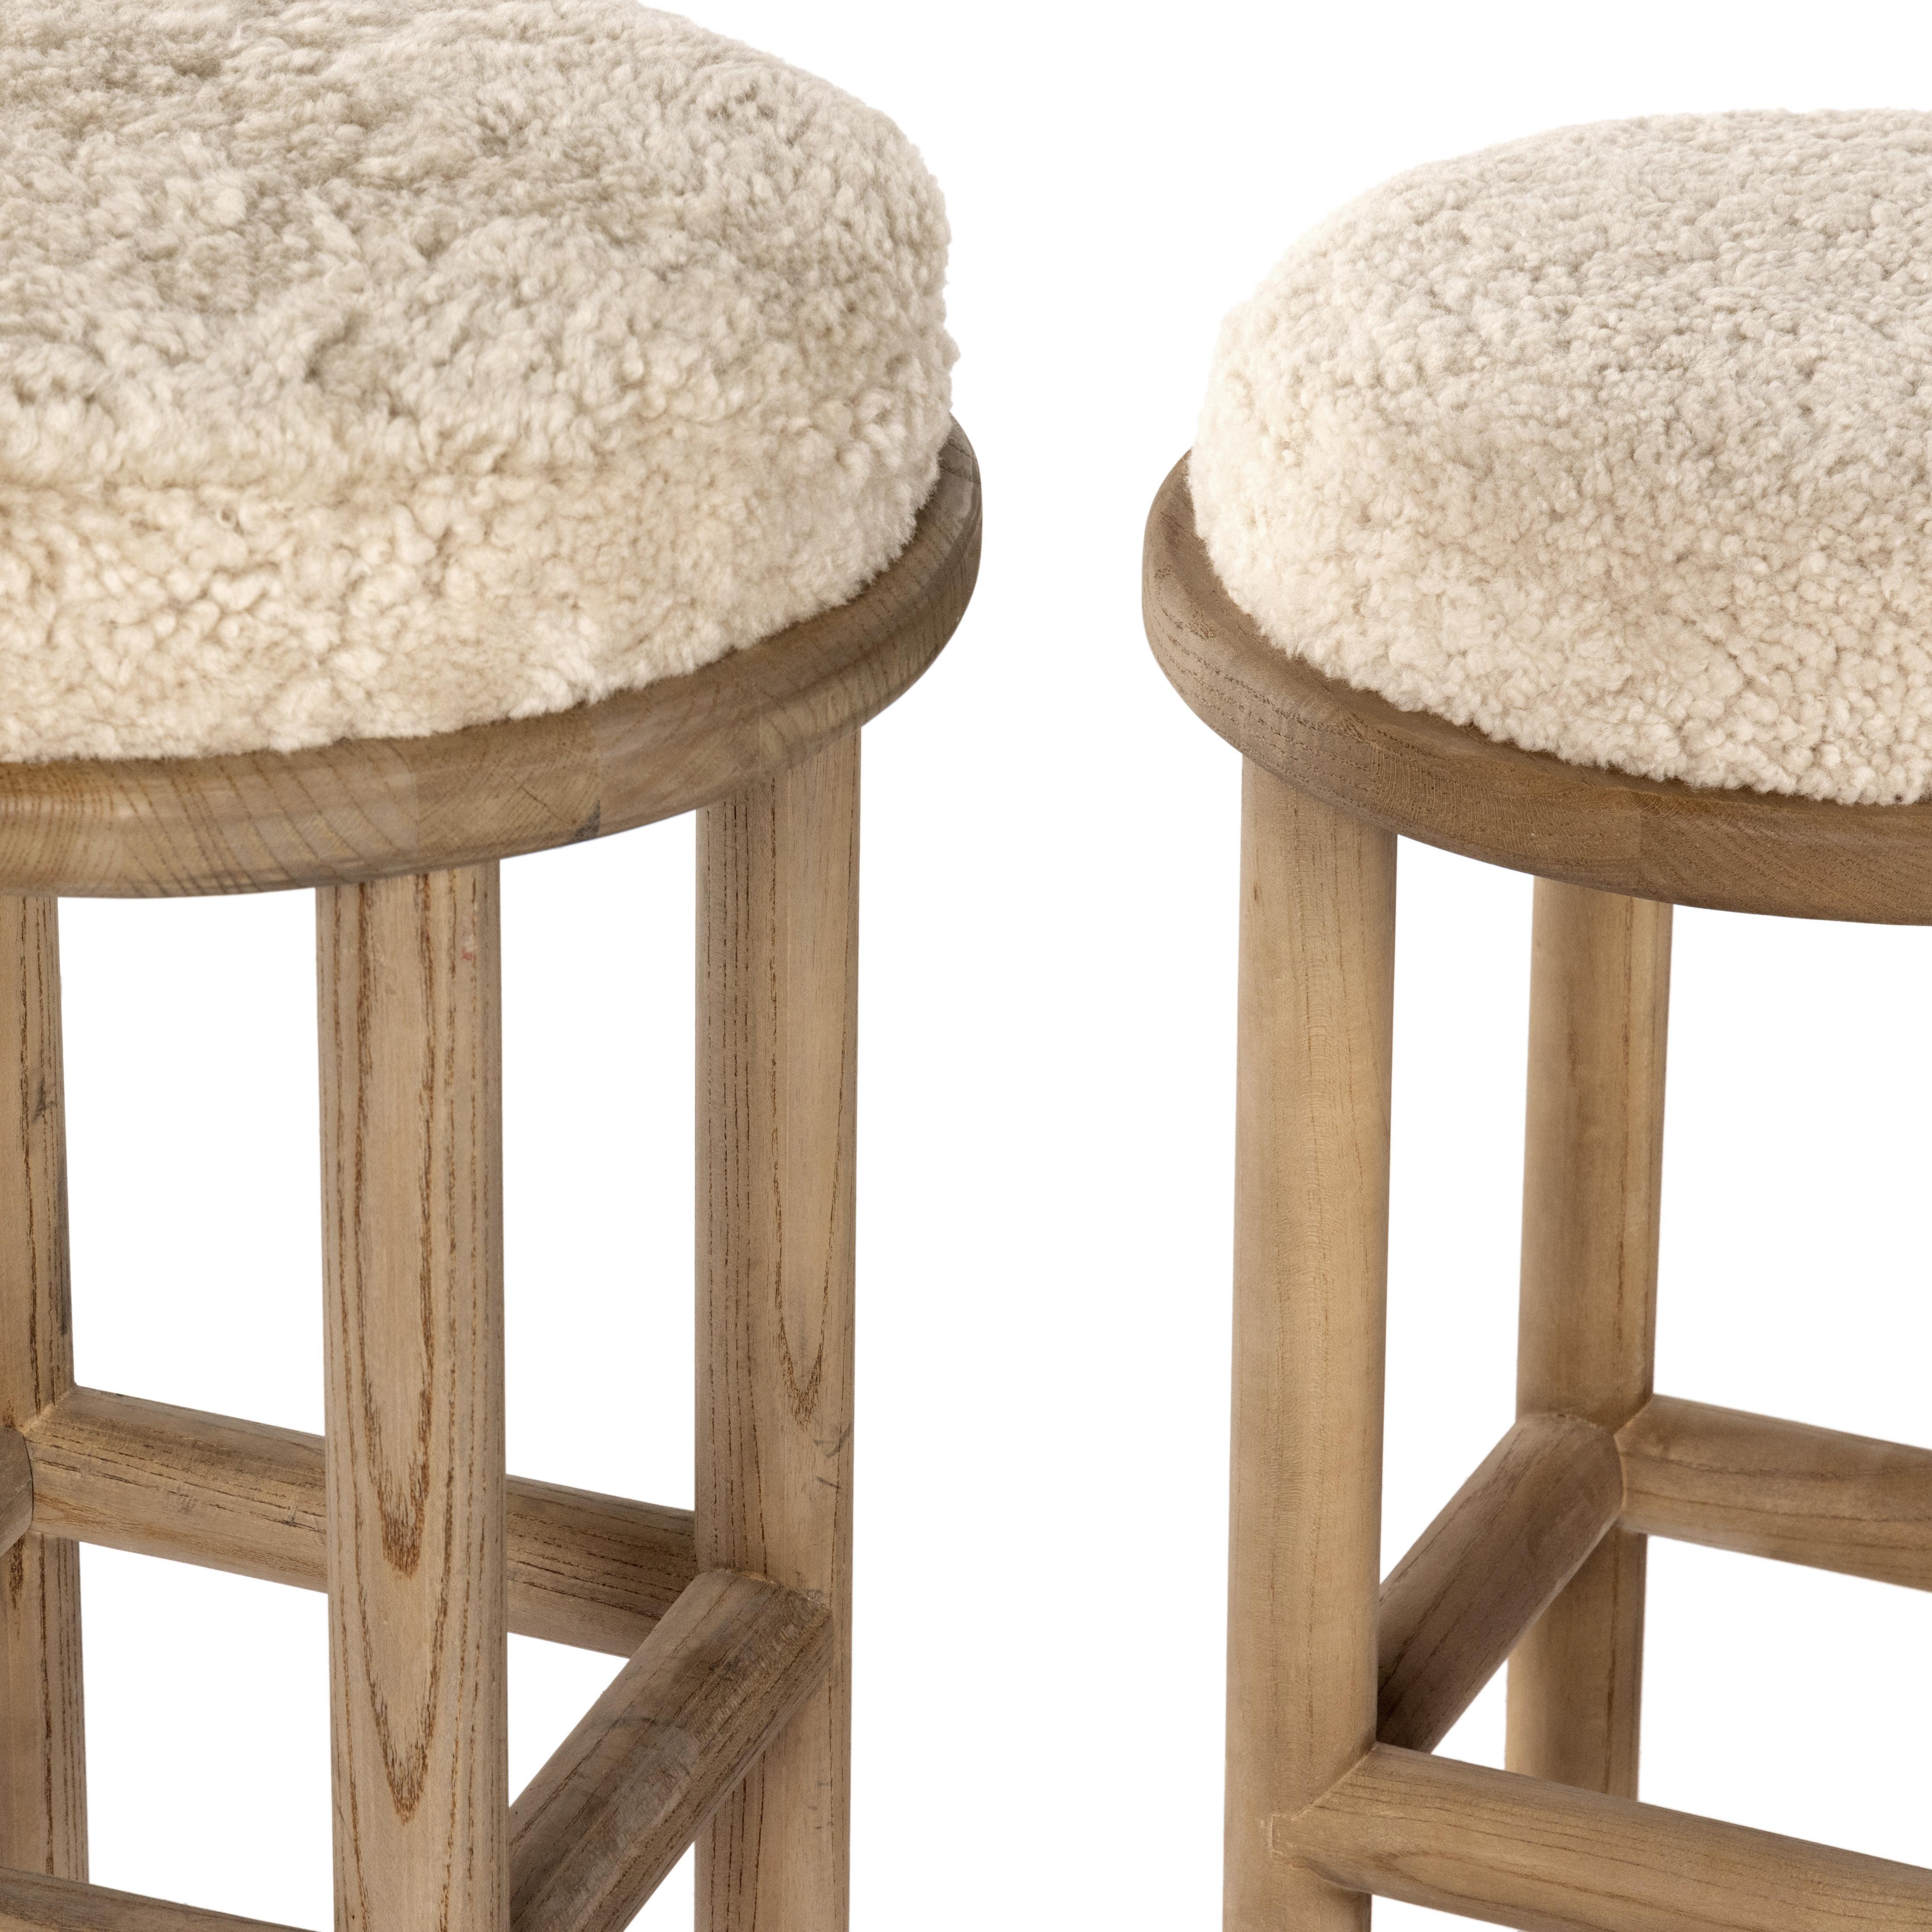 Bring a textural touch to the counter with the Saldino stool. Blonde-finished solid parawood supports rounded seating of soft beige shearling for comfort and style alike. Amethyst Home provides interior design, new home construction design consulting, vintage area rugs, and lighting in the Scottsdale metro area.